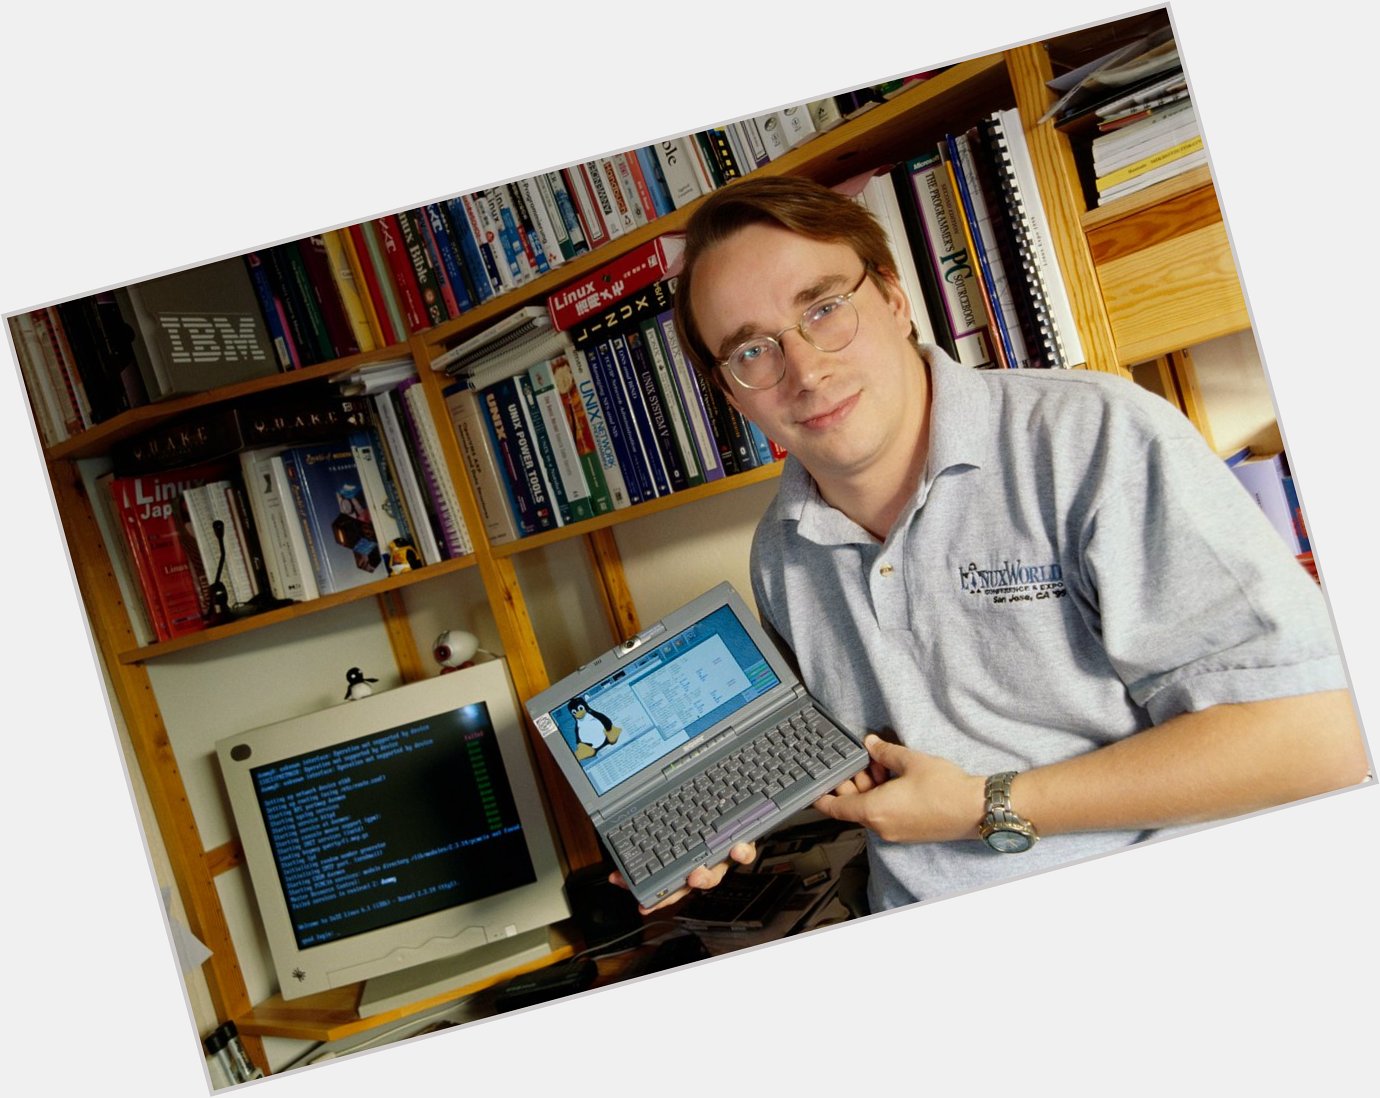 Happy birthday to Linus Torvalds who bring us 